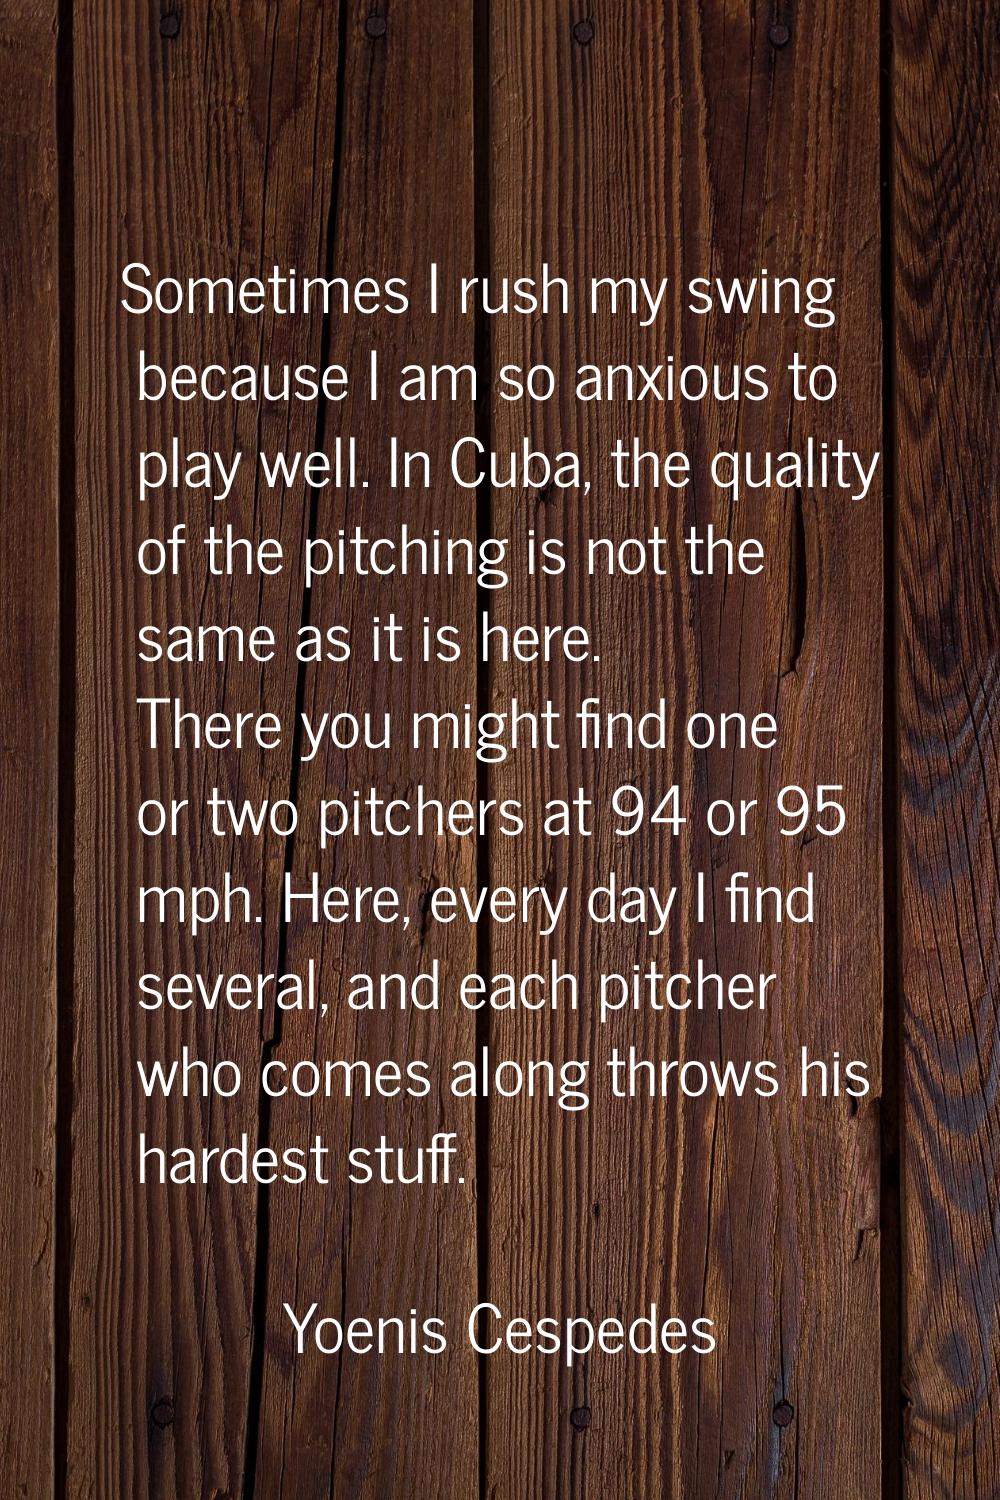 Sometimes I rush my swing because I am so anxious to play well. In Cuba, the quality of the pitchin